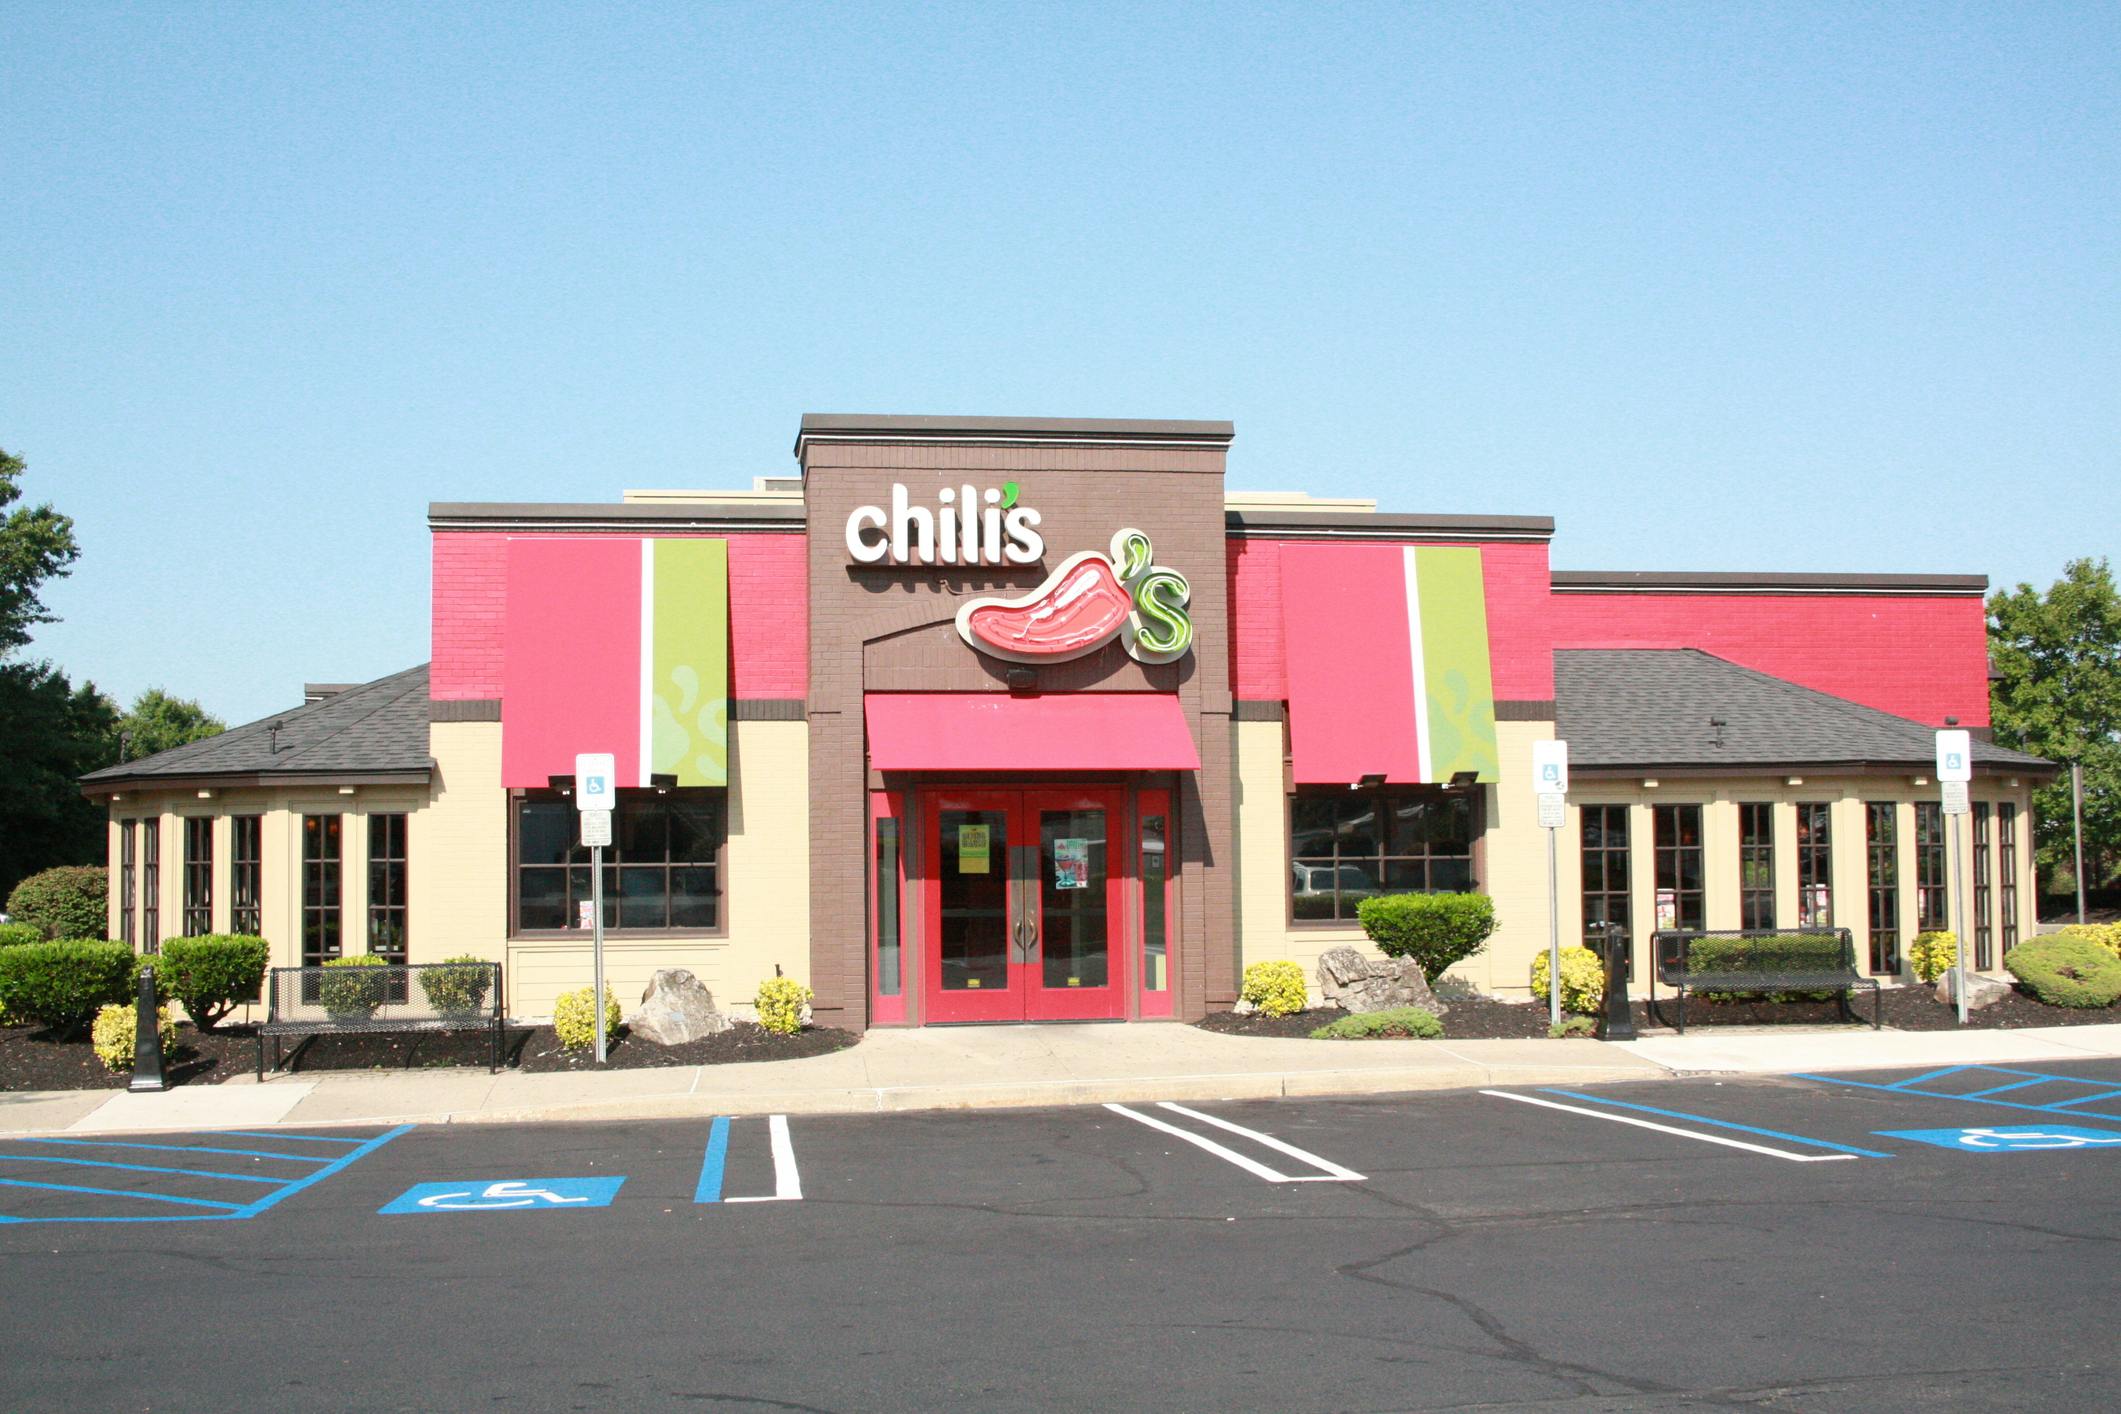 A Chili's storefront view from the parking lot.